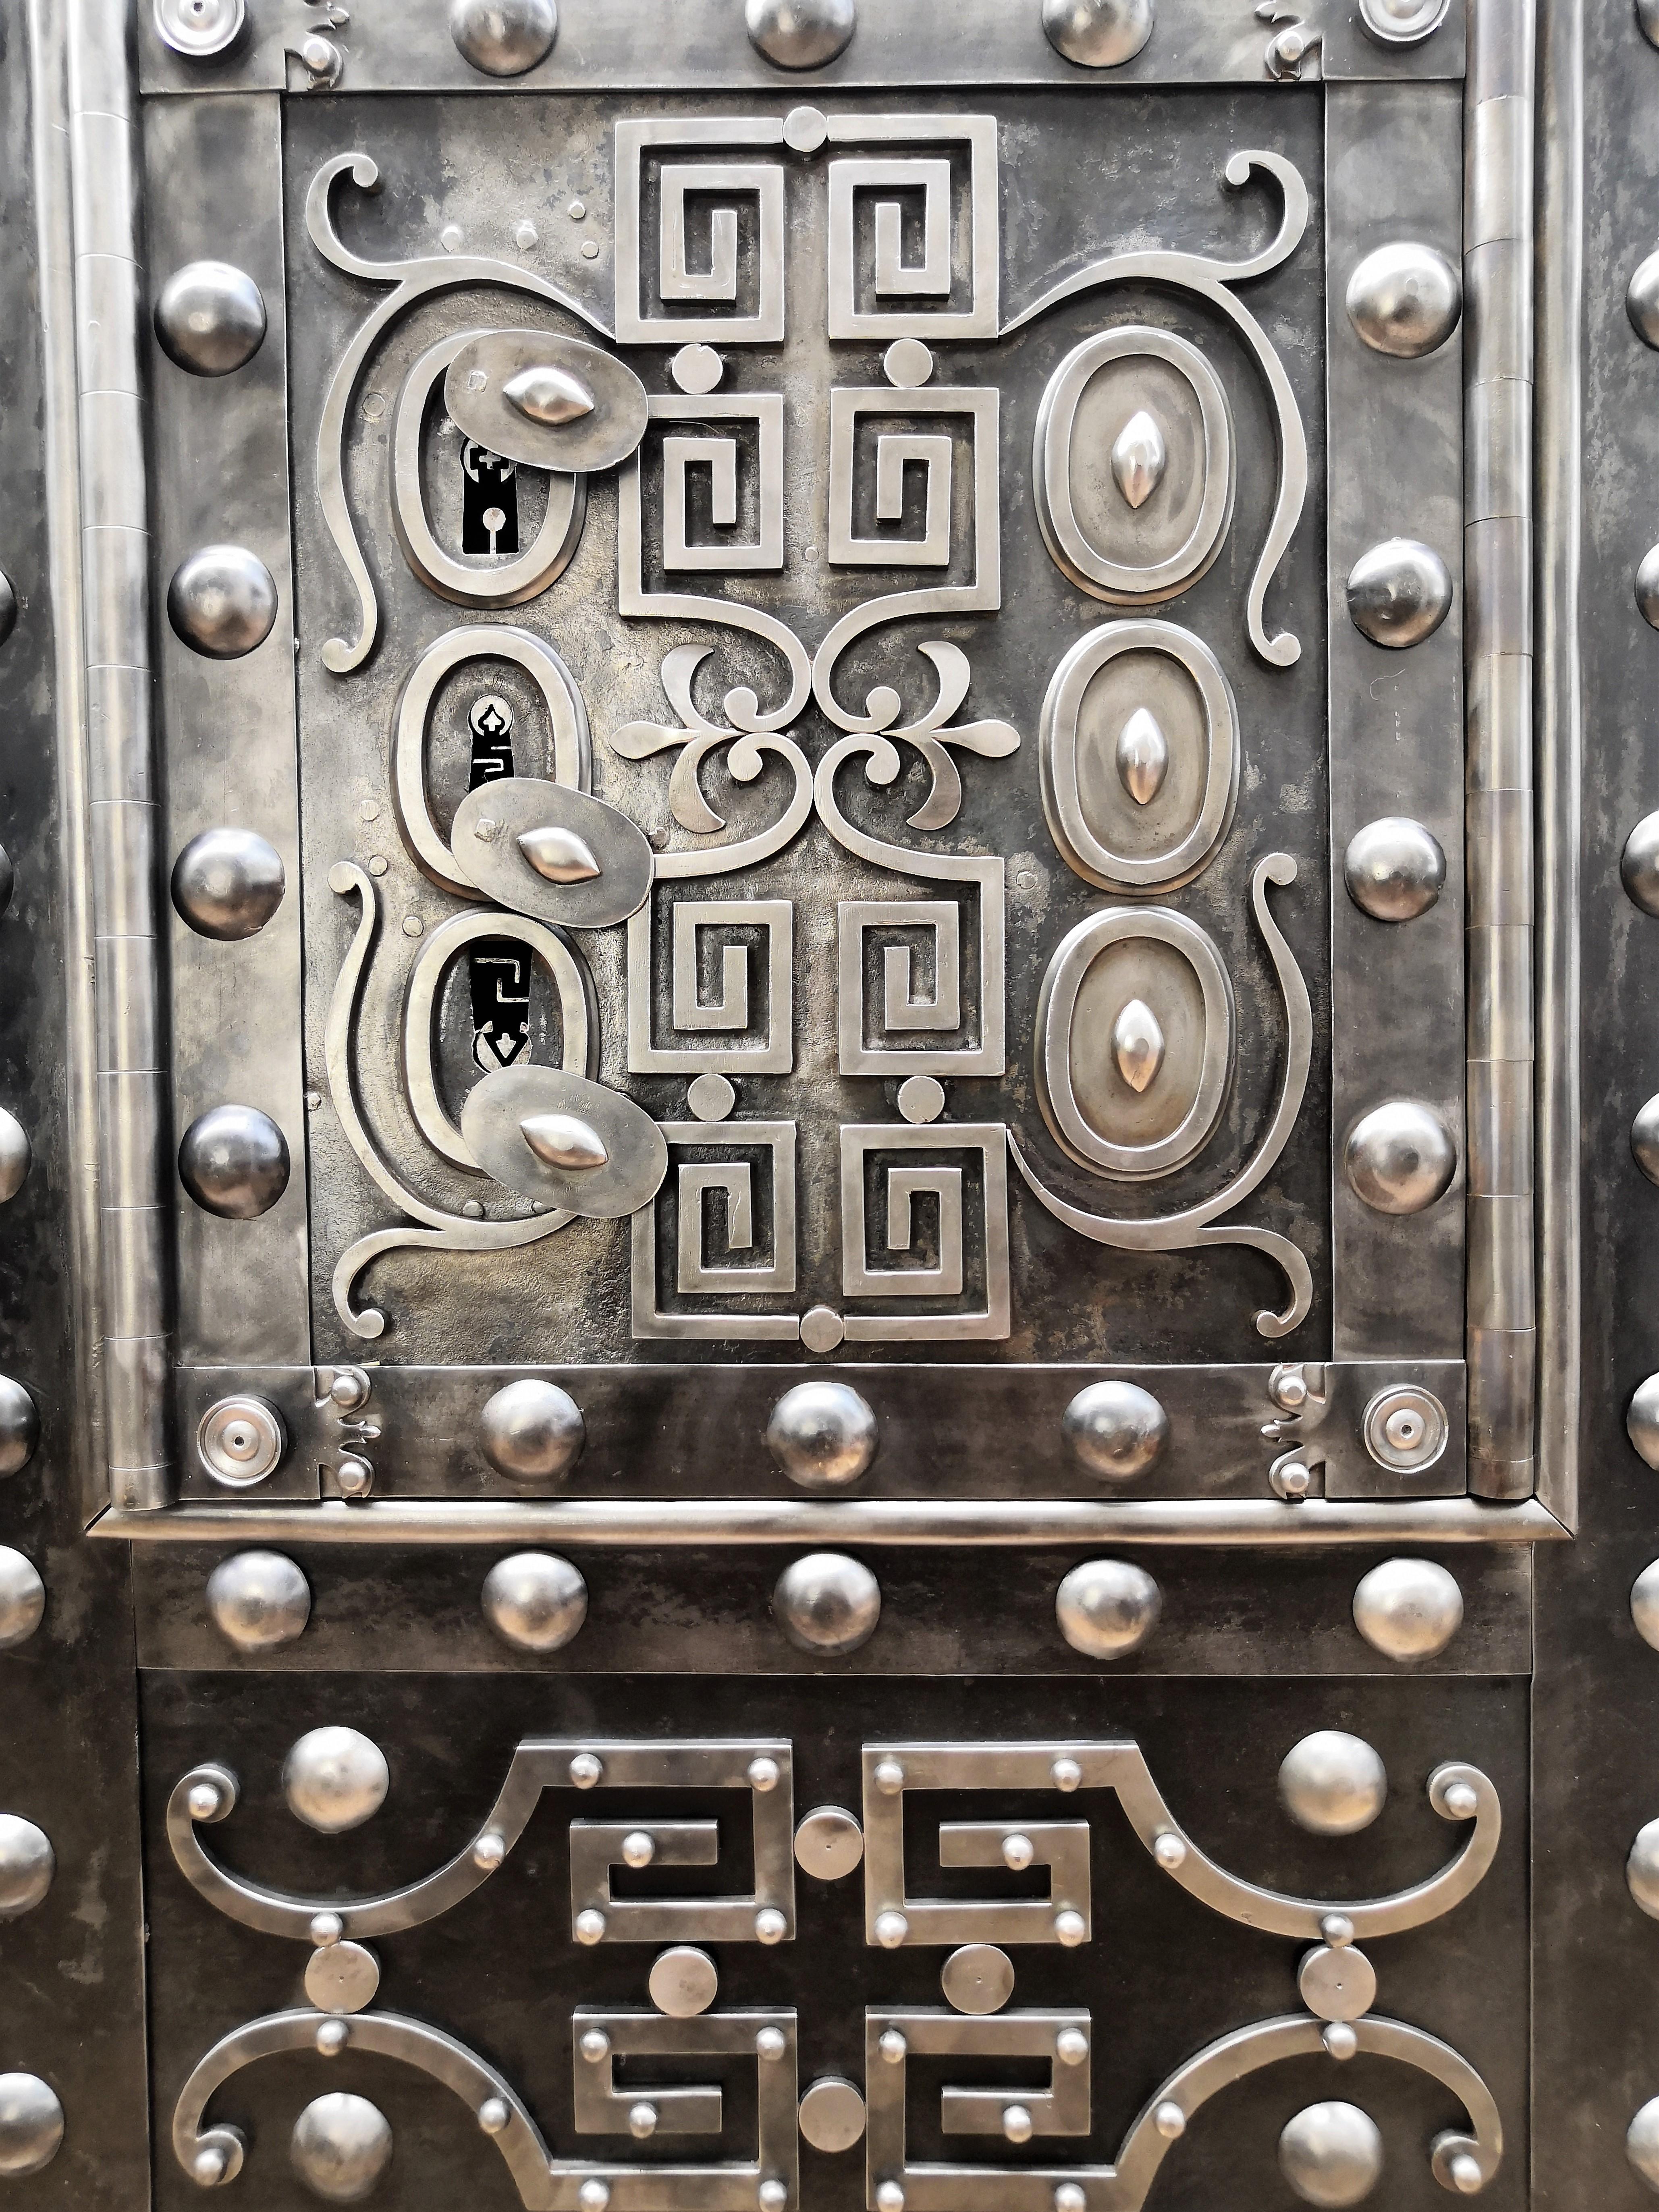 Northern Italian antique safe with typical all-around hobnails, dated circa 1790-1820, probably used inside a small feud fiefdom or fortified town castle of the Piedmont region, Italy's second-largest region where great craftsmanship and history